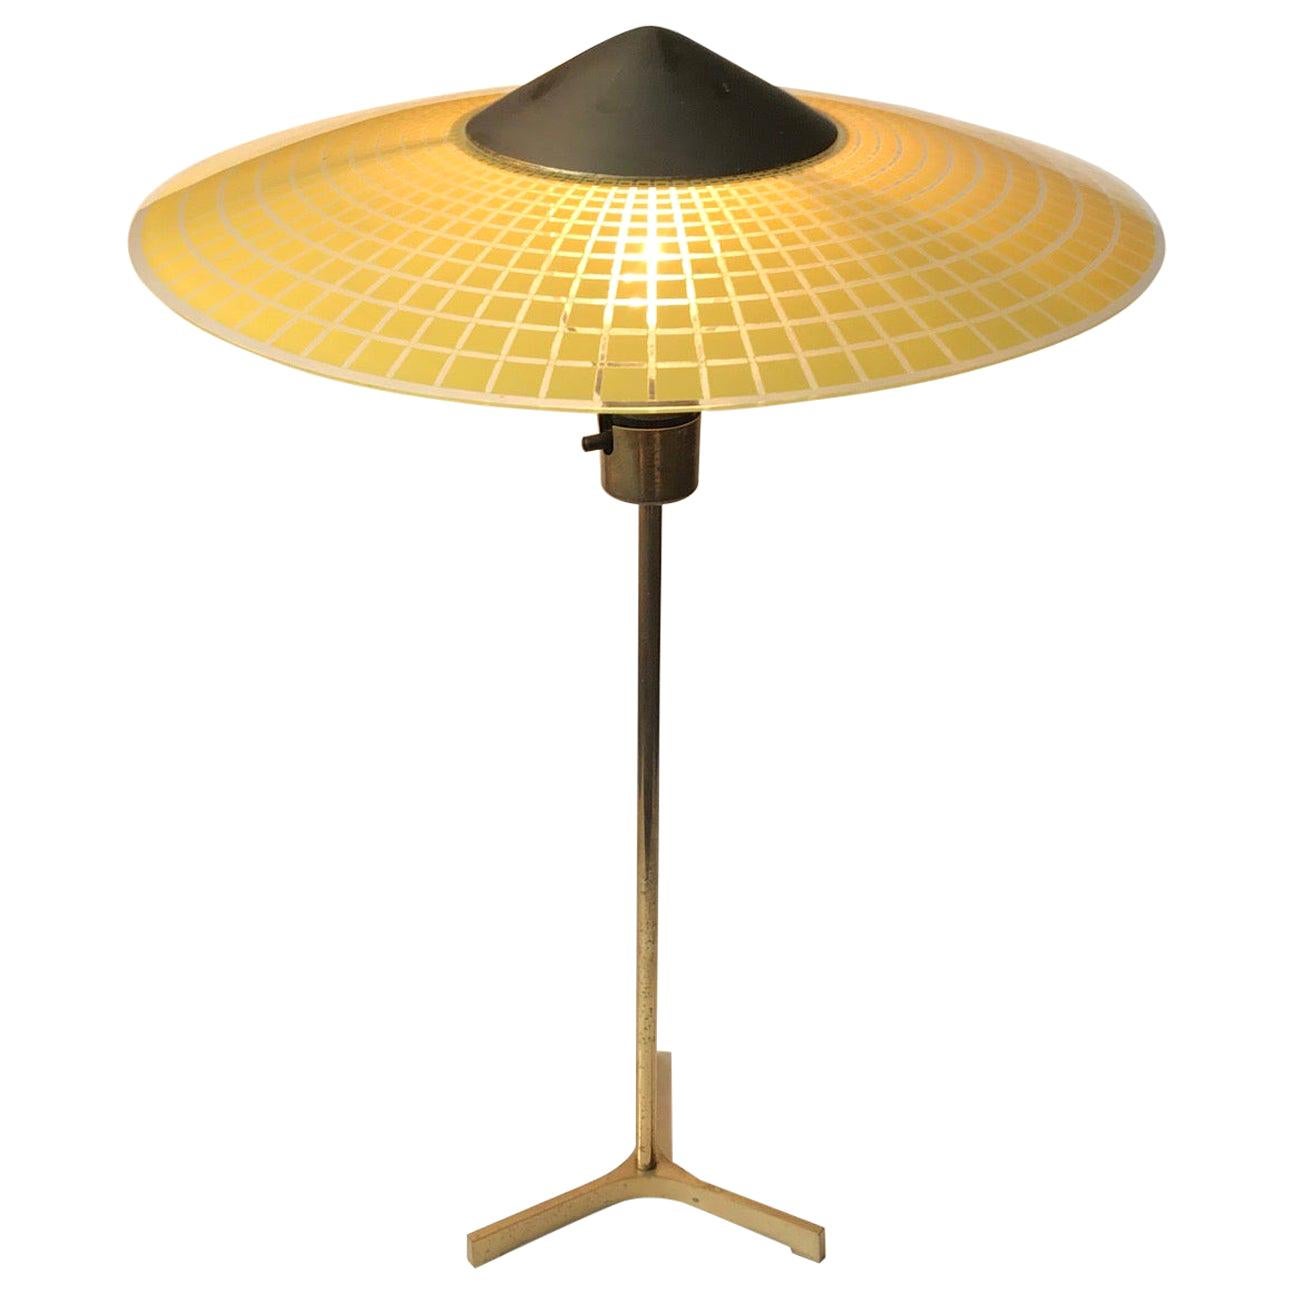 Vintage Tripod Table Lamp in Brass and Checkered Glass, Swiss, circa 1960s